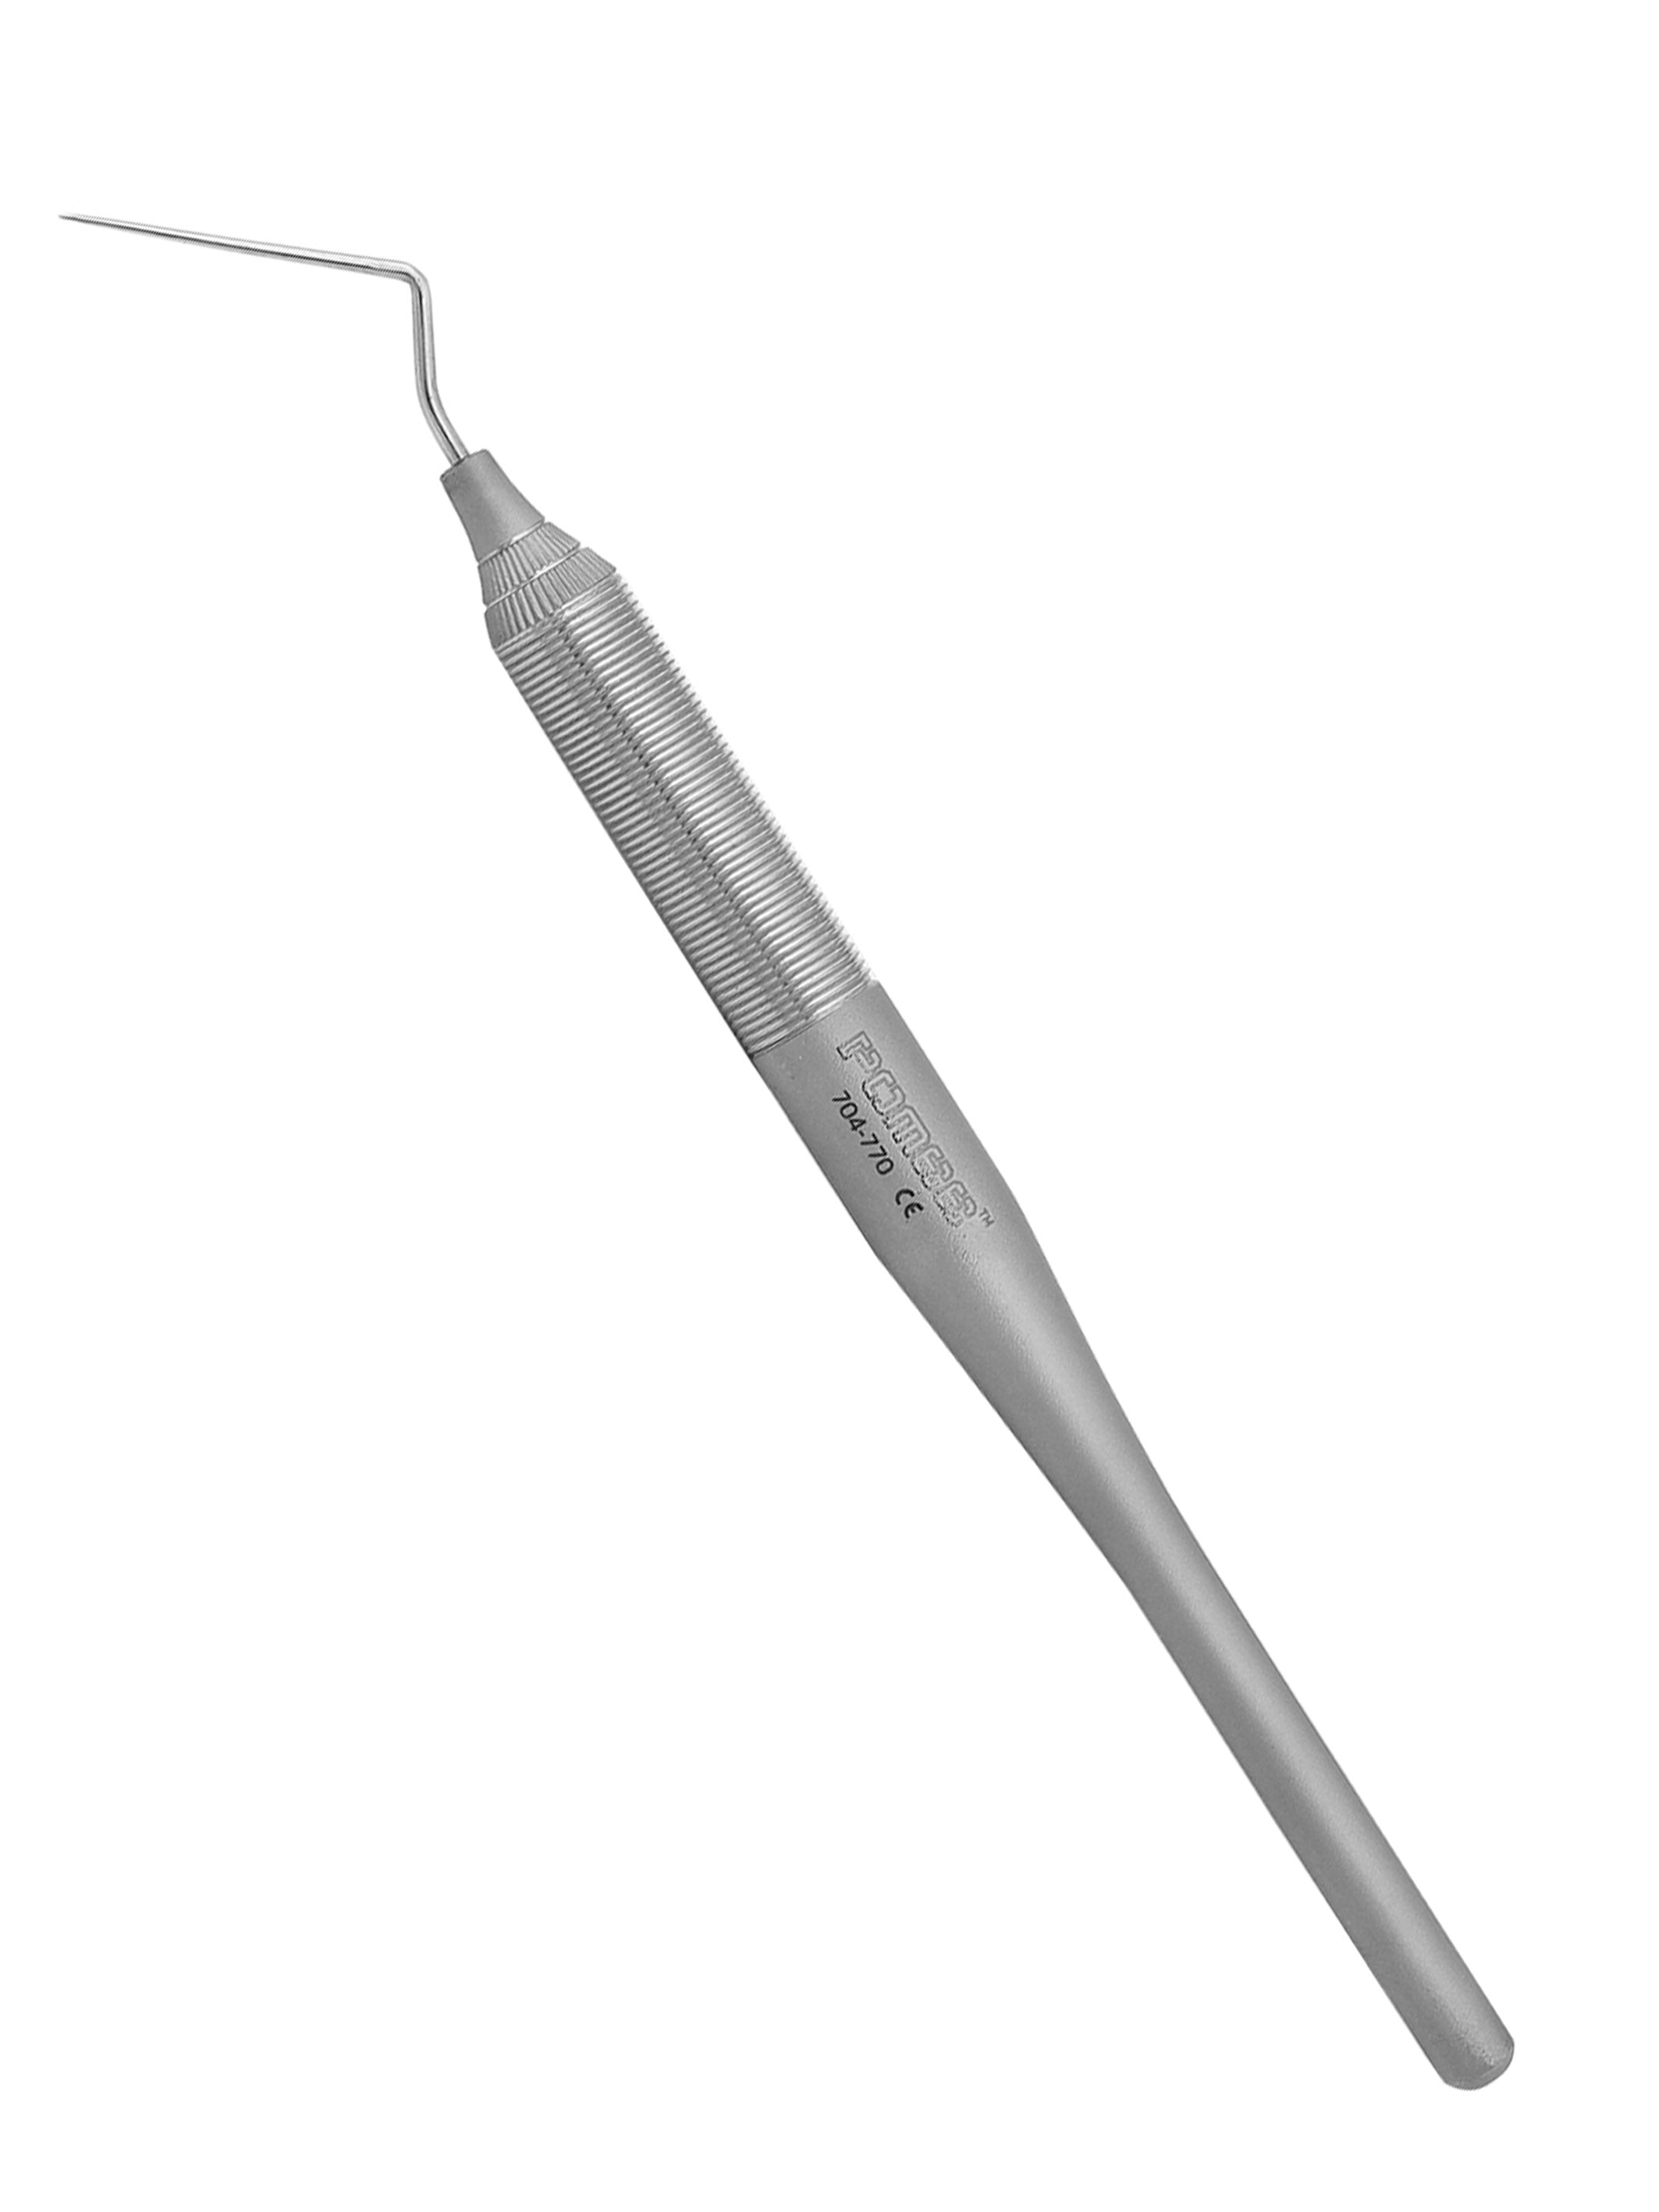 Root Canal Spreaders